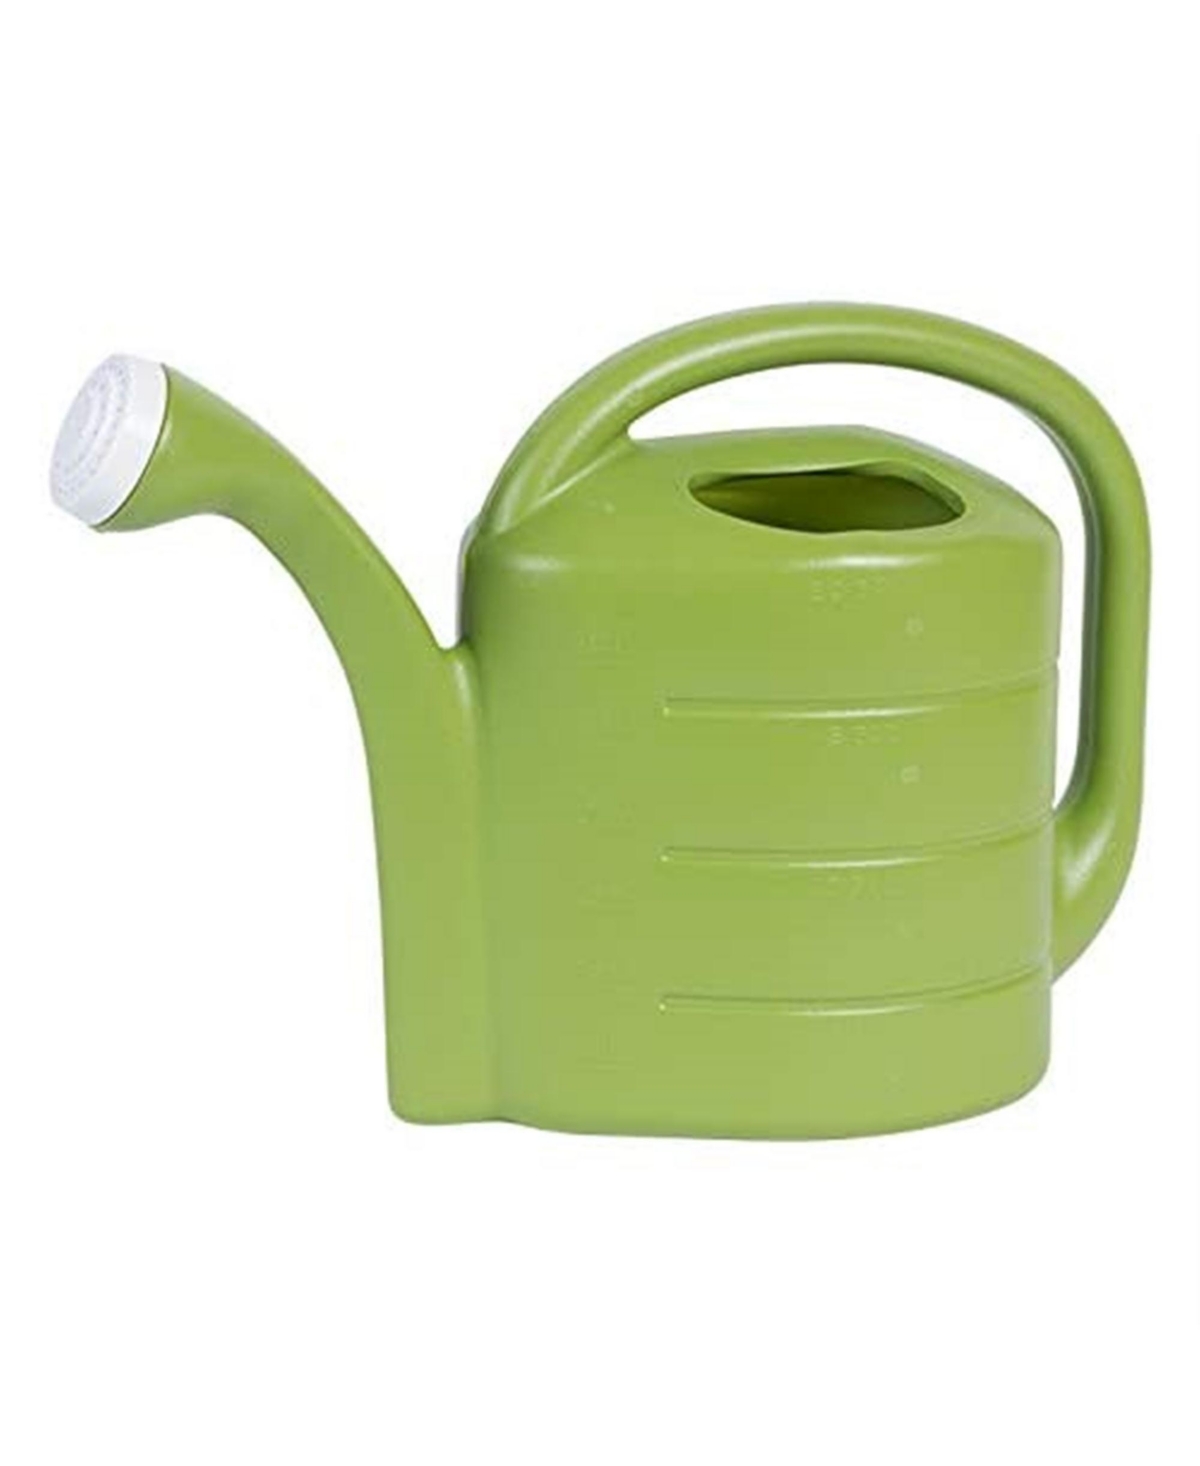 Deluxe Plastic Watering Can Green, 2 Gallons - Green